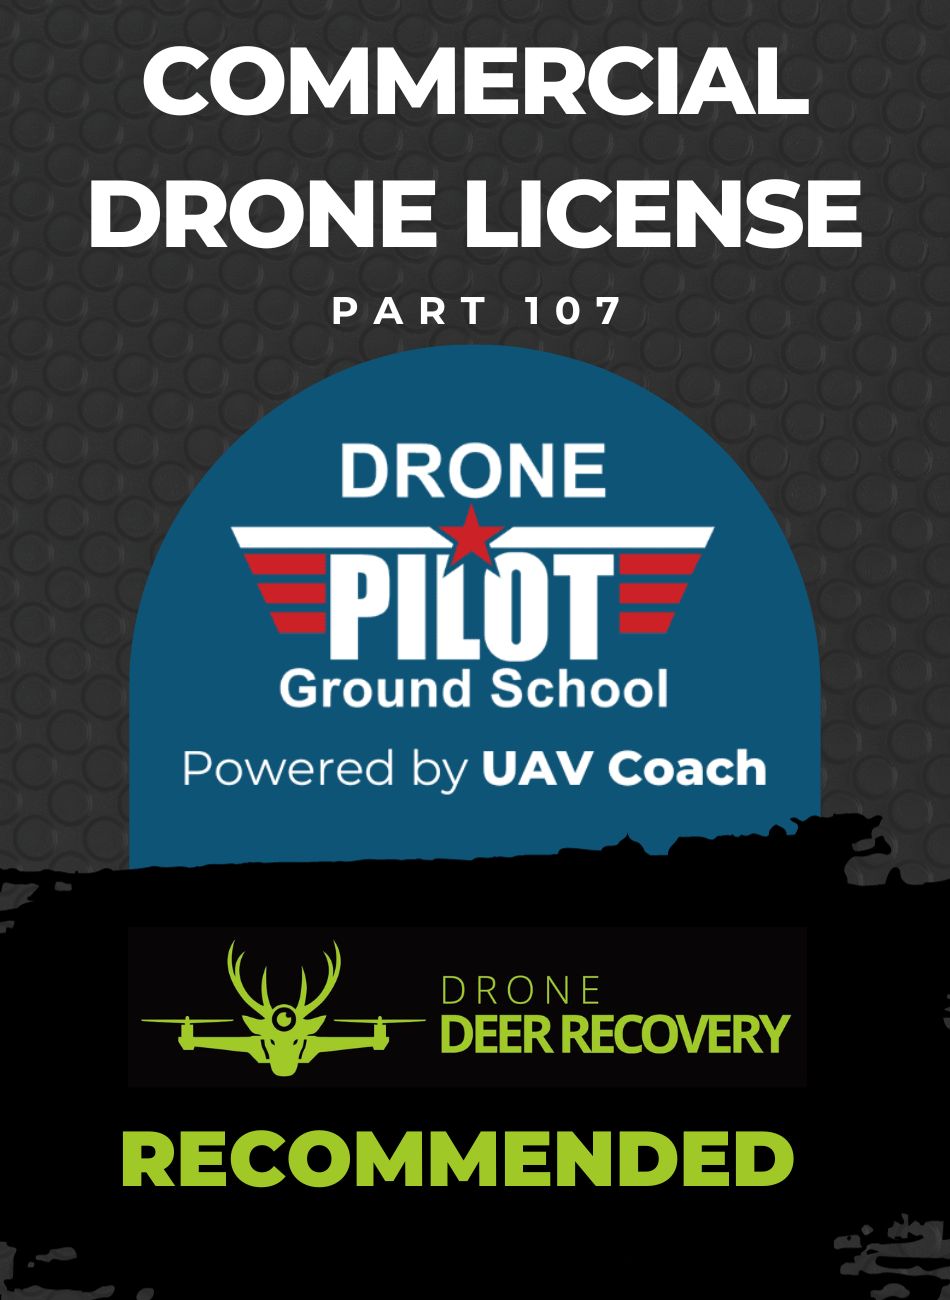 Commercial Drone License - Drone Pilot Ground School